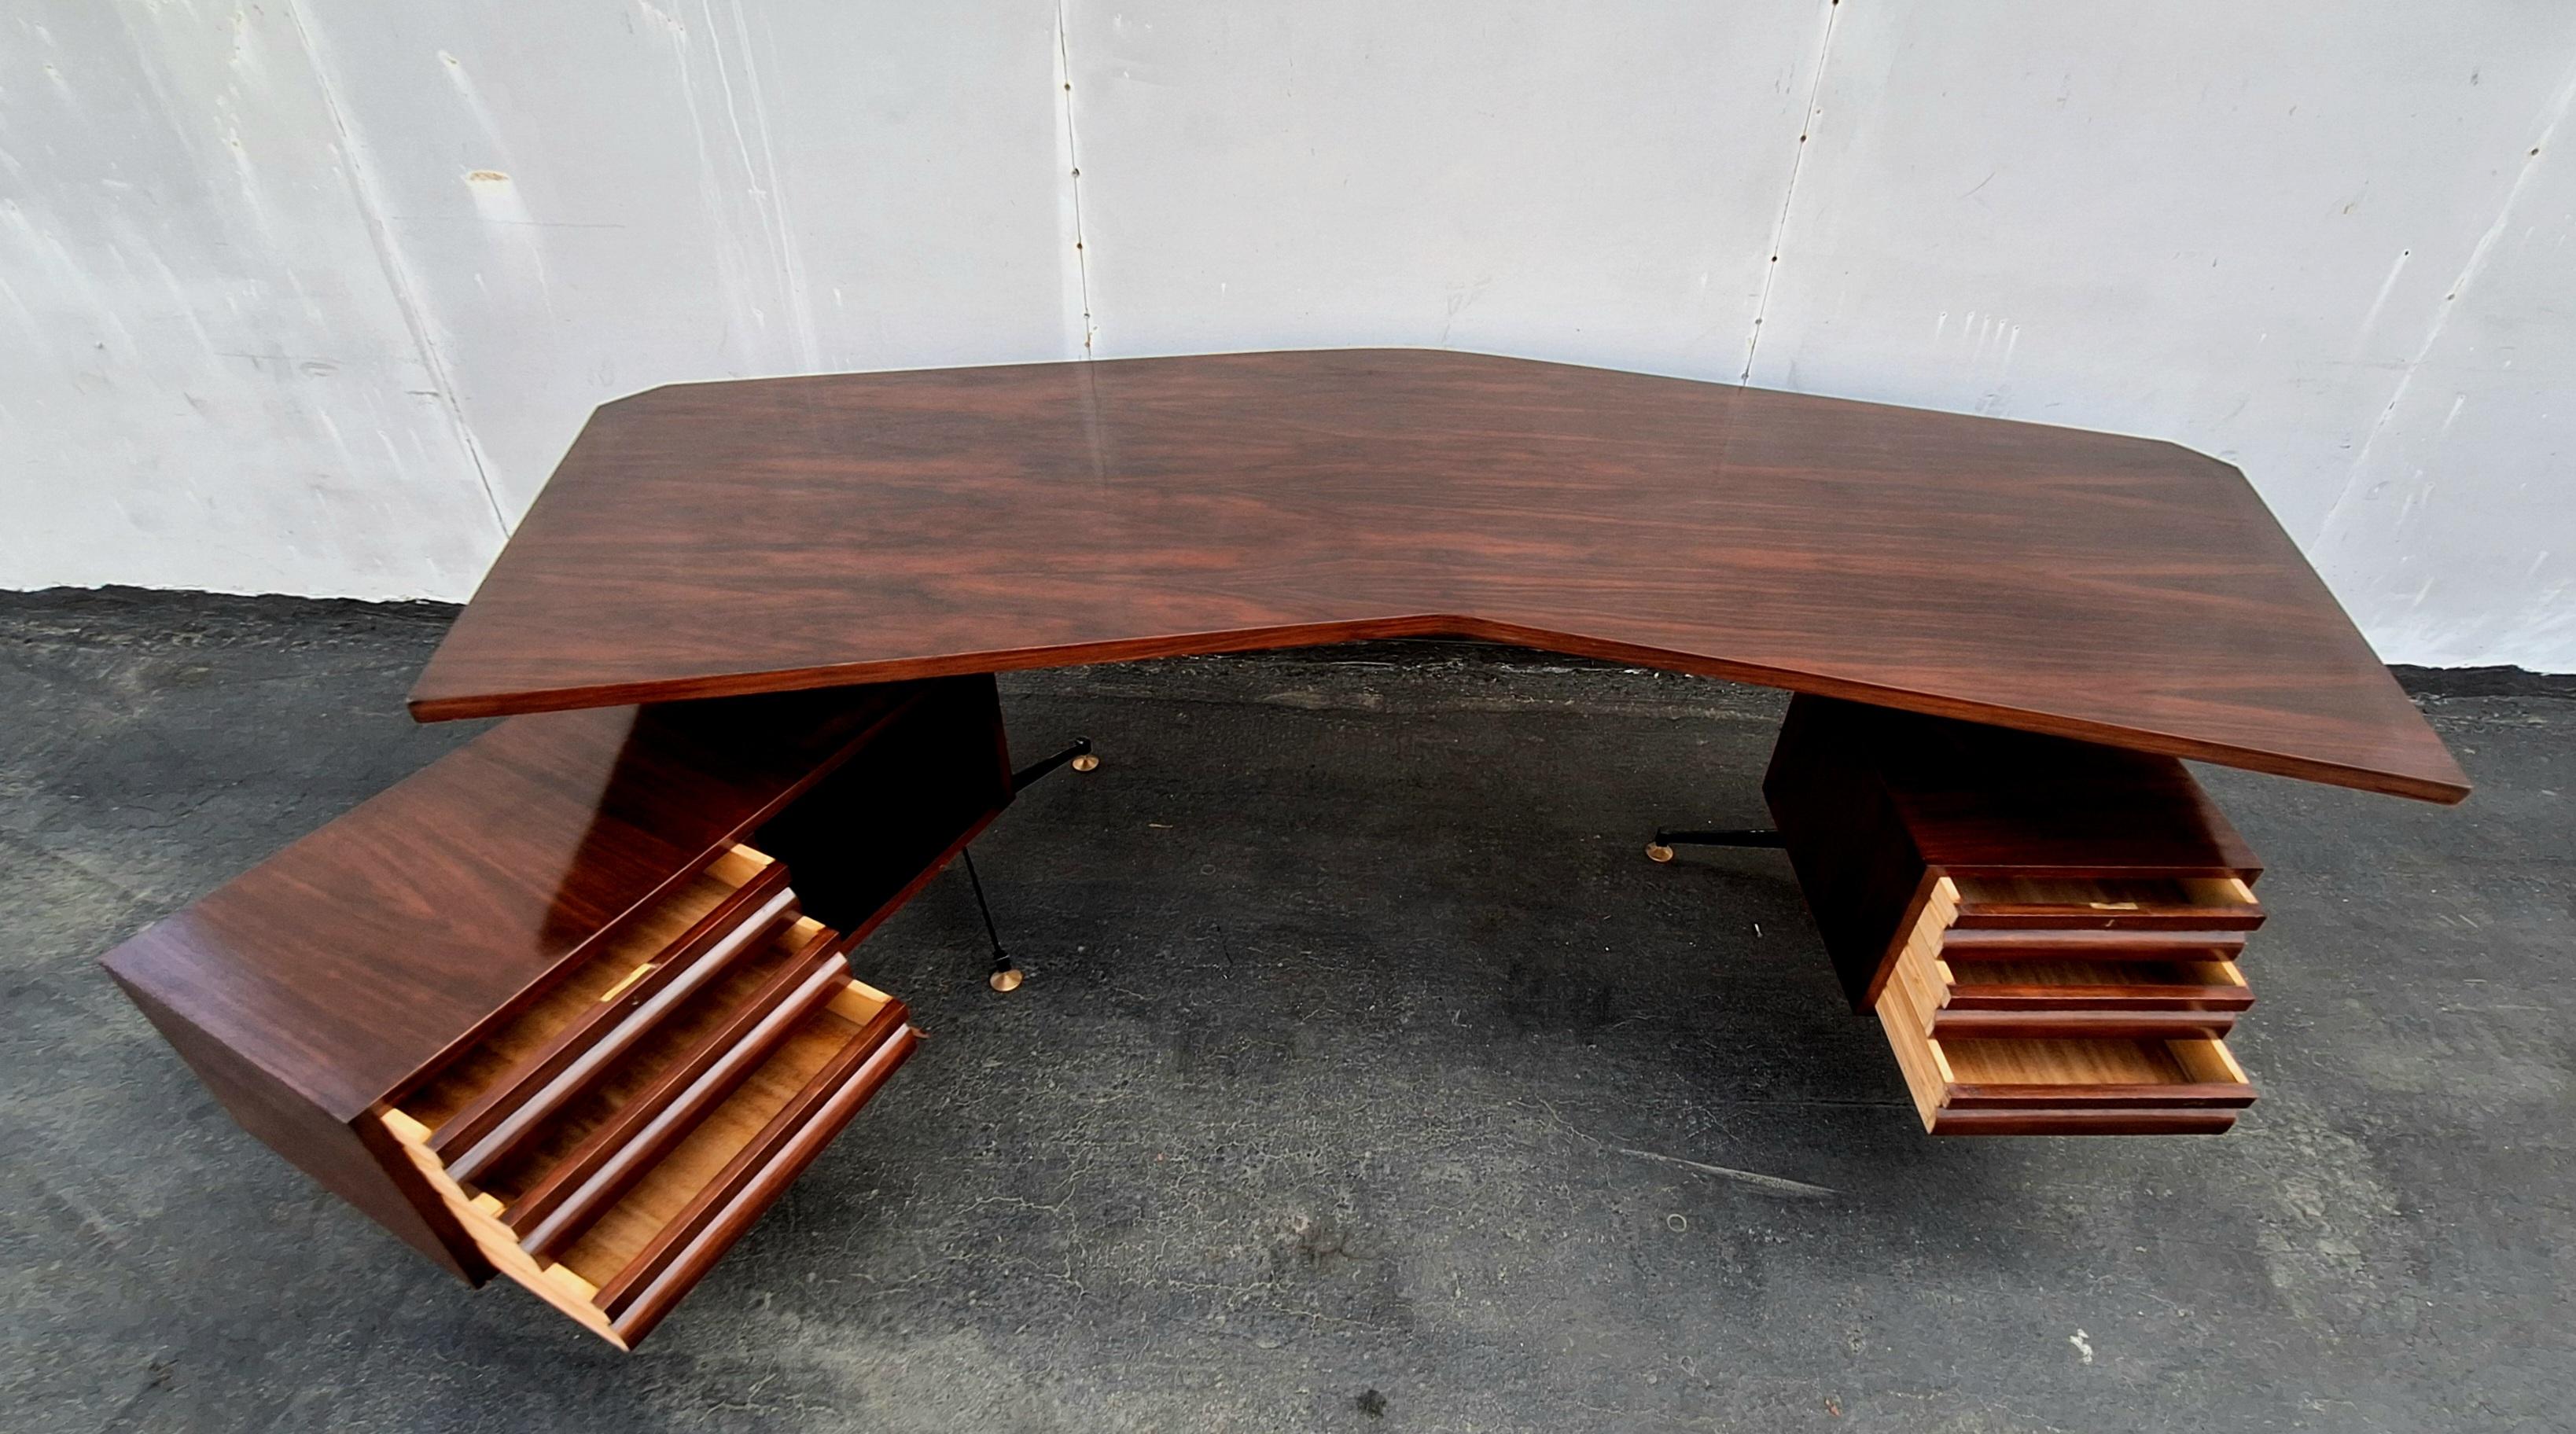 Italian  large executive desk designed by Osvaldo Borsani, manufactured by Tecno Milano in Italy, circa 1950.

This eye-catching desk has a unique design with the integrated drawer that is adjustable in position, making it a versatile piece with a